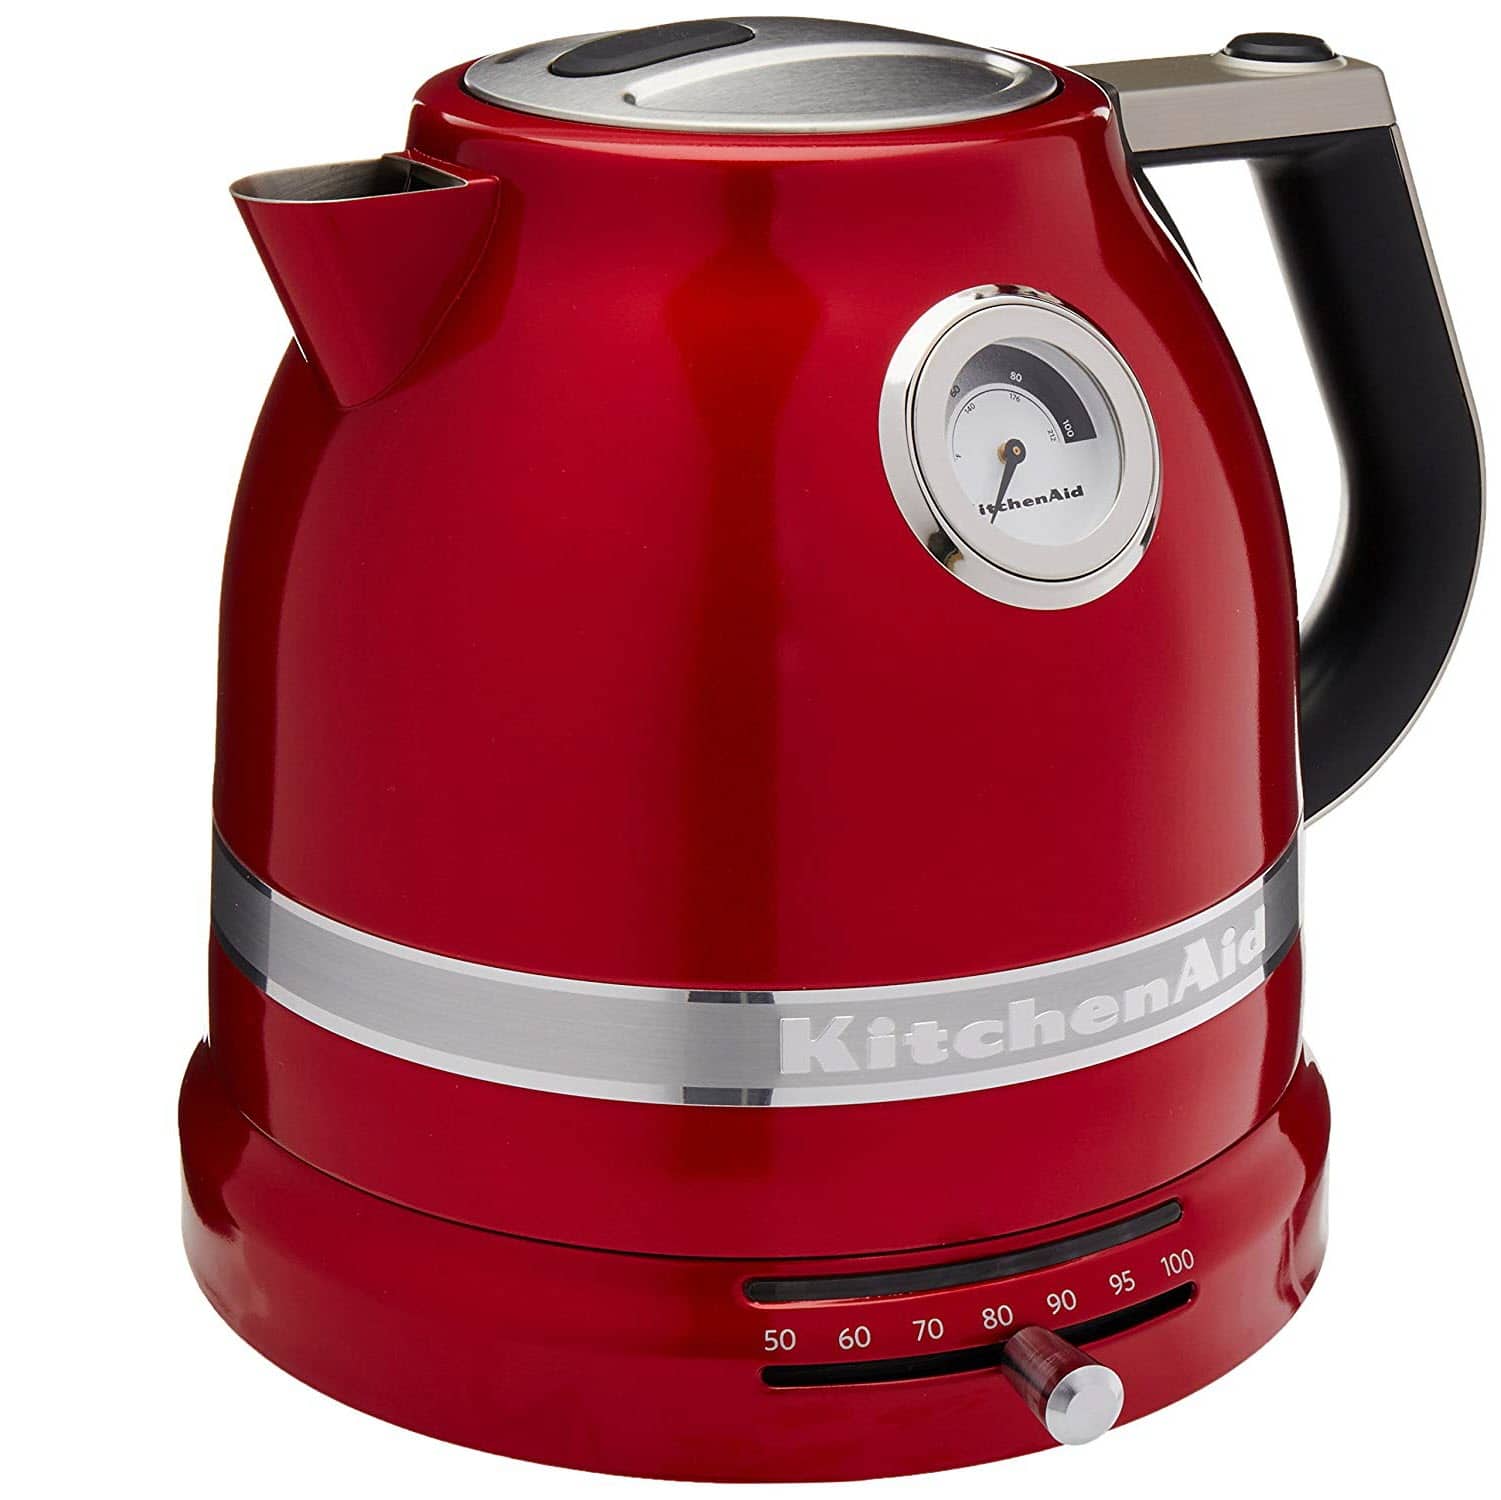 kitchenAid KEK1522CA Kettle - Candy Apple Red Pro Line Electric Kettle